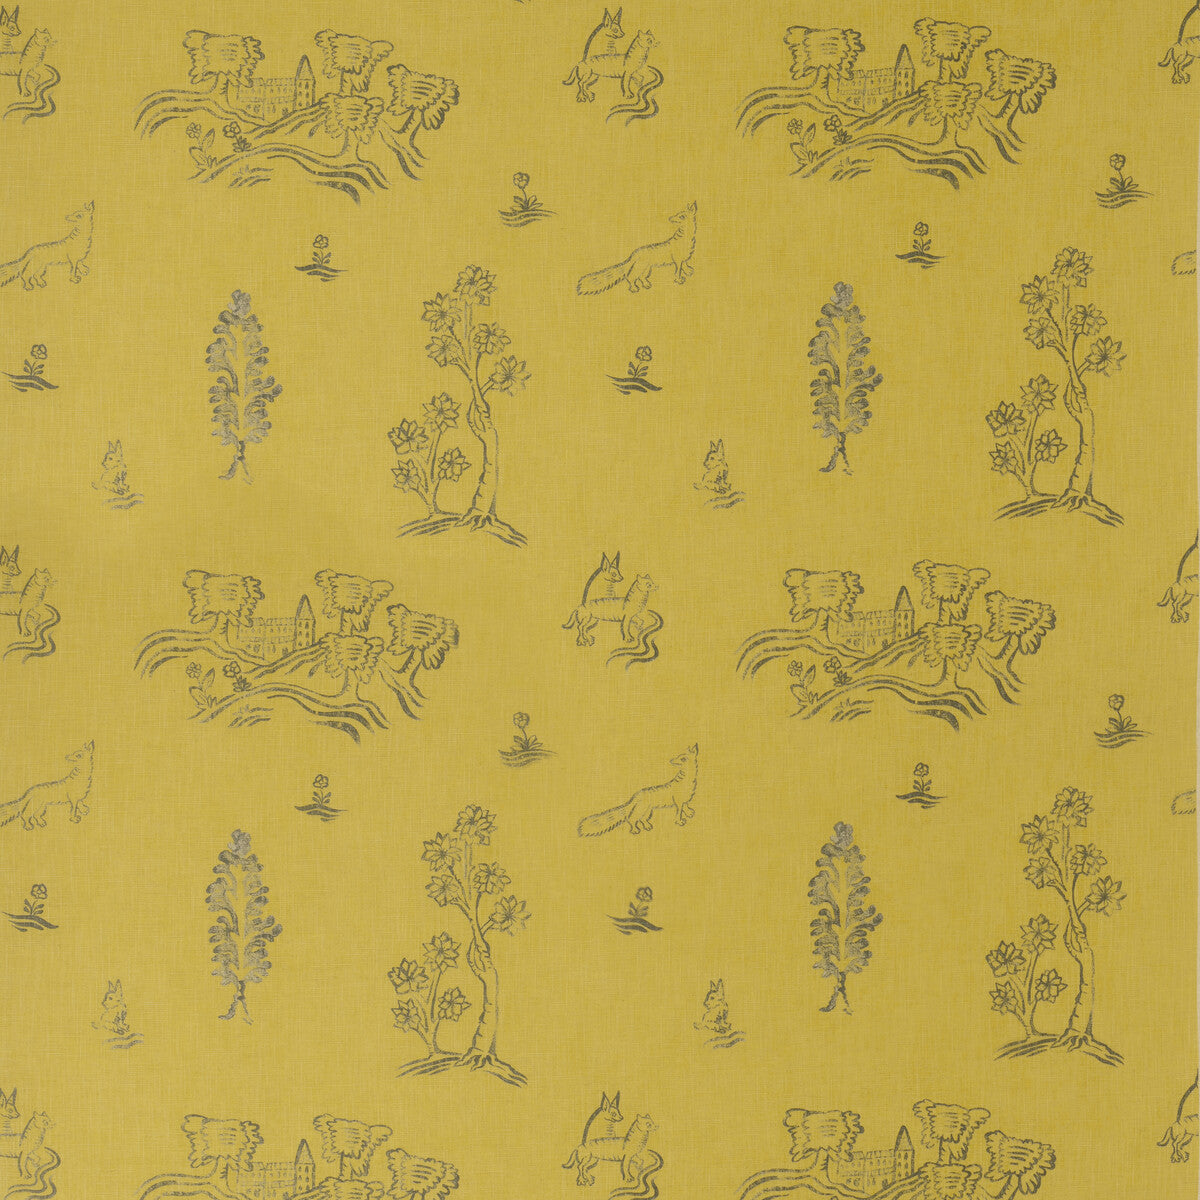 Friendly Folk fabric in provencal yellow color - pattern AM100318.4.0 - by Kravet Couture in the Andrew Martin Kit Kemp collection